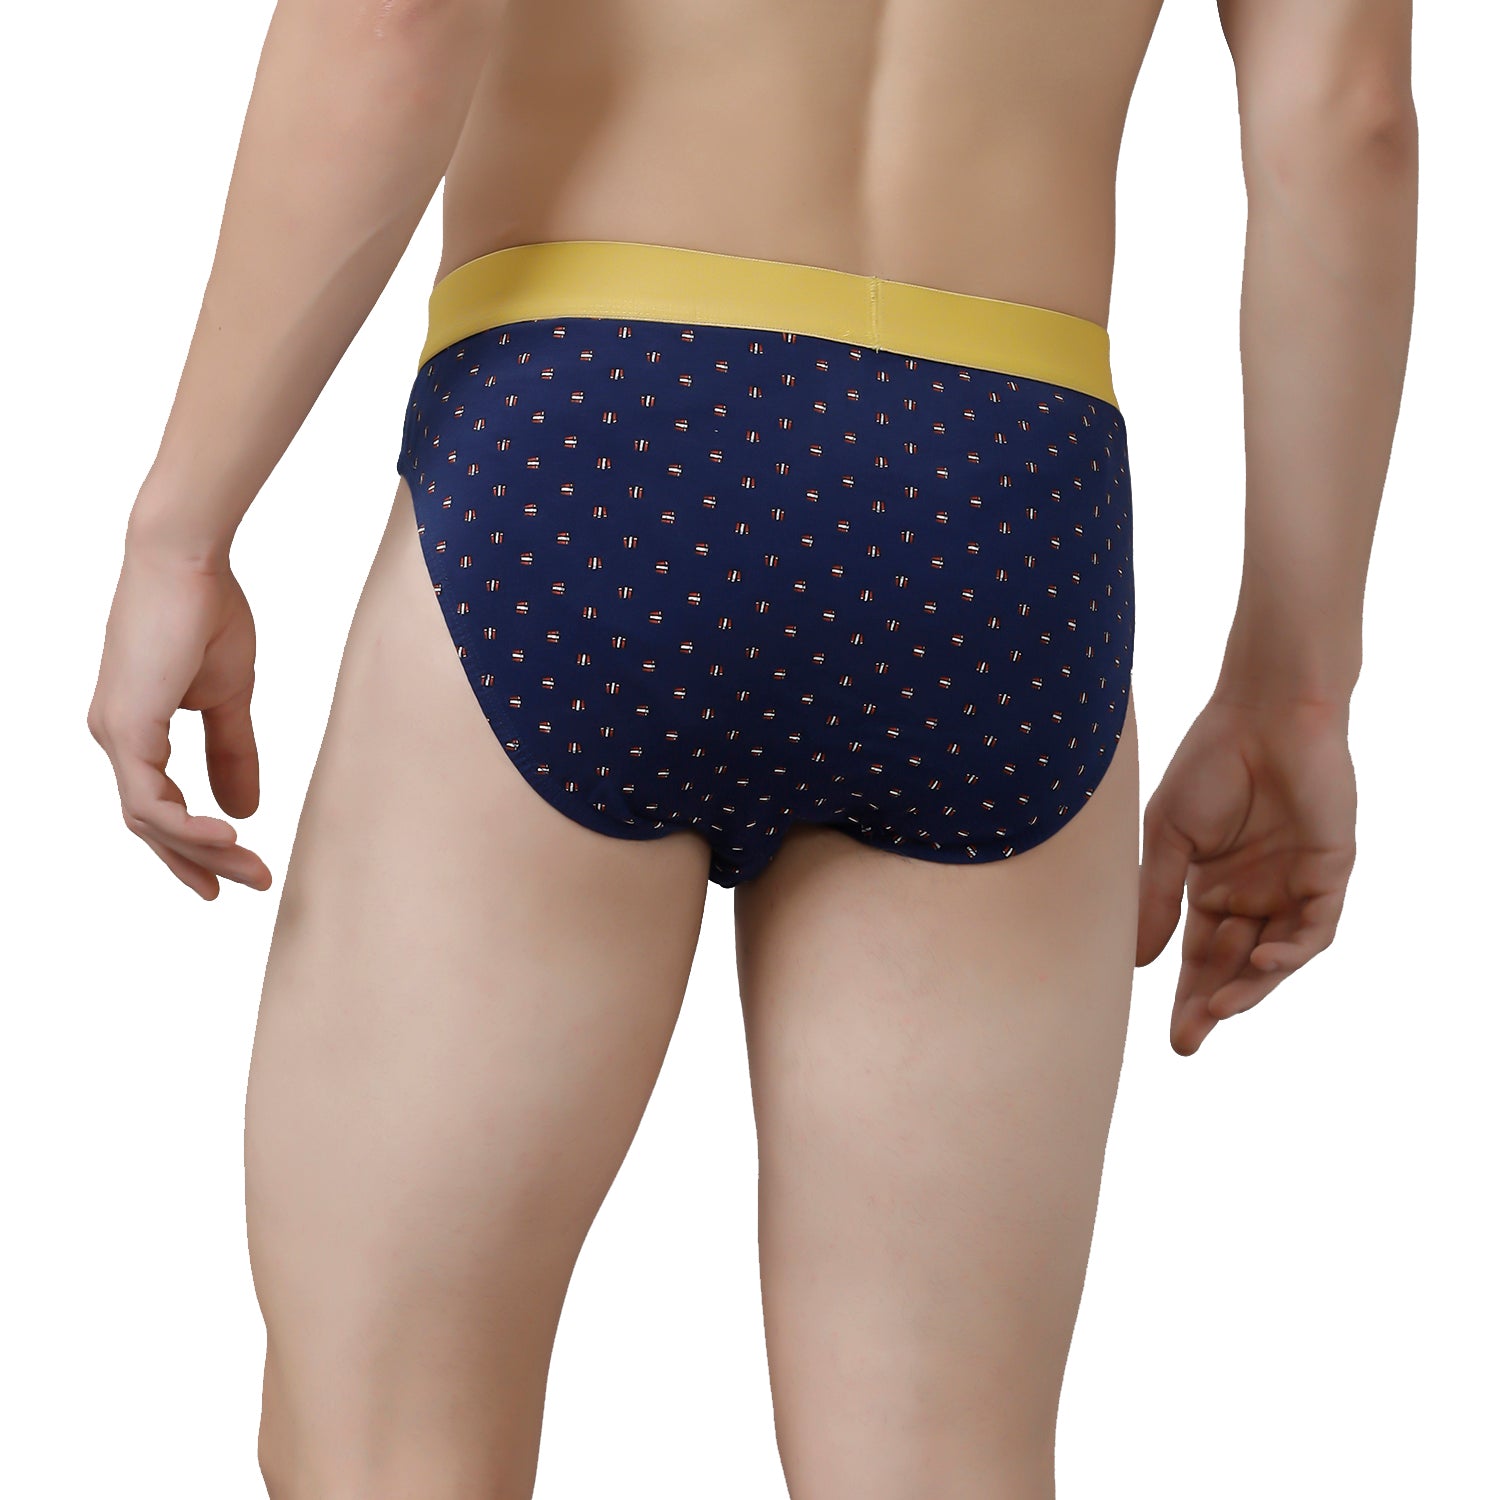 CP BRO Men's Printed Briefs with Exposed Waistband Value Pack - Grey & Navy (Pack of 2)